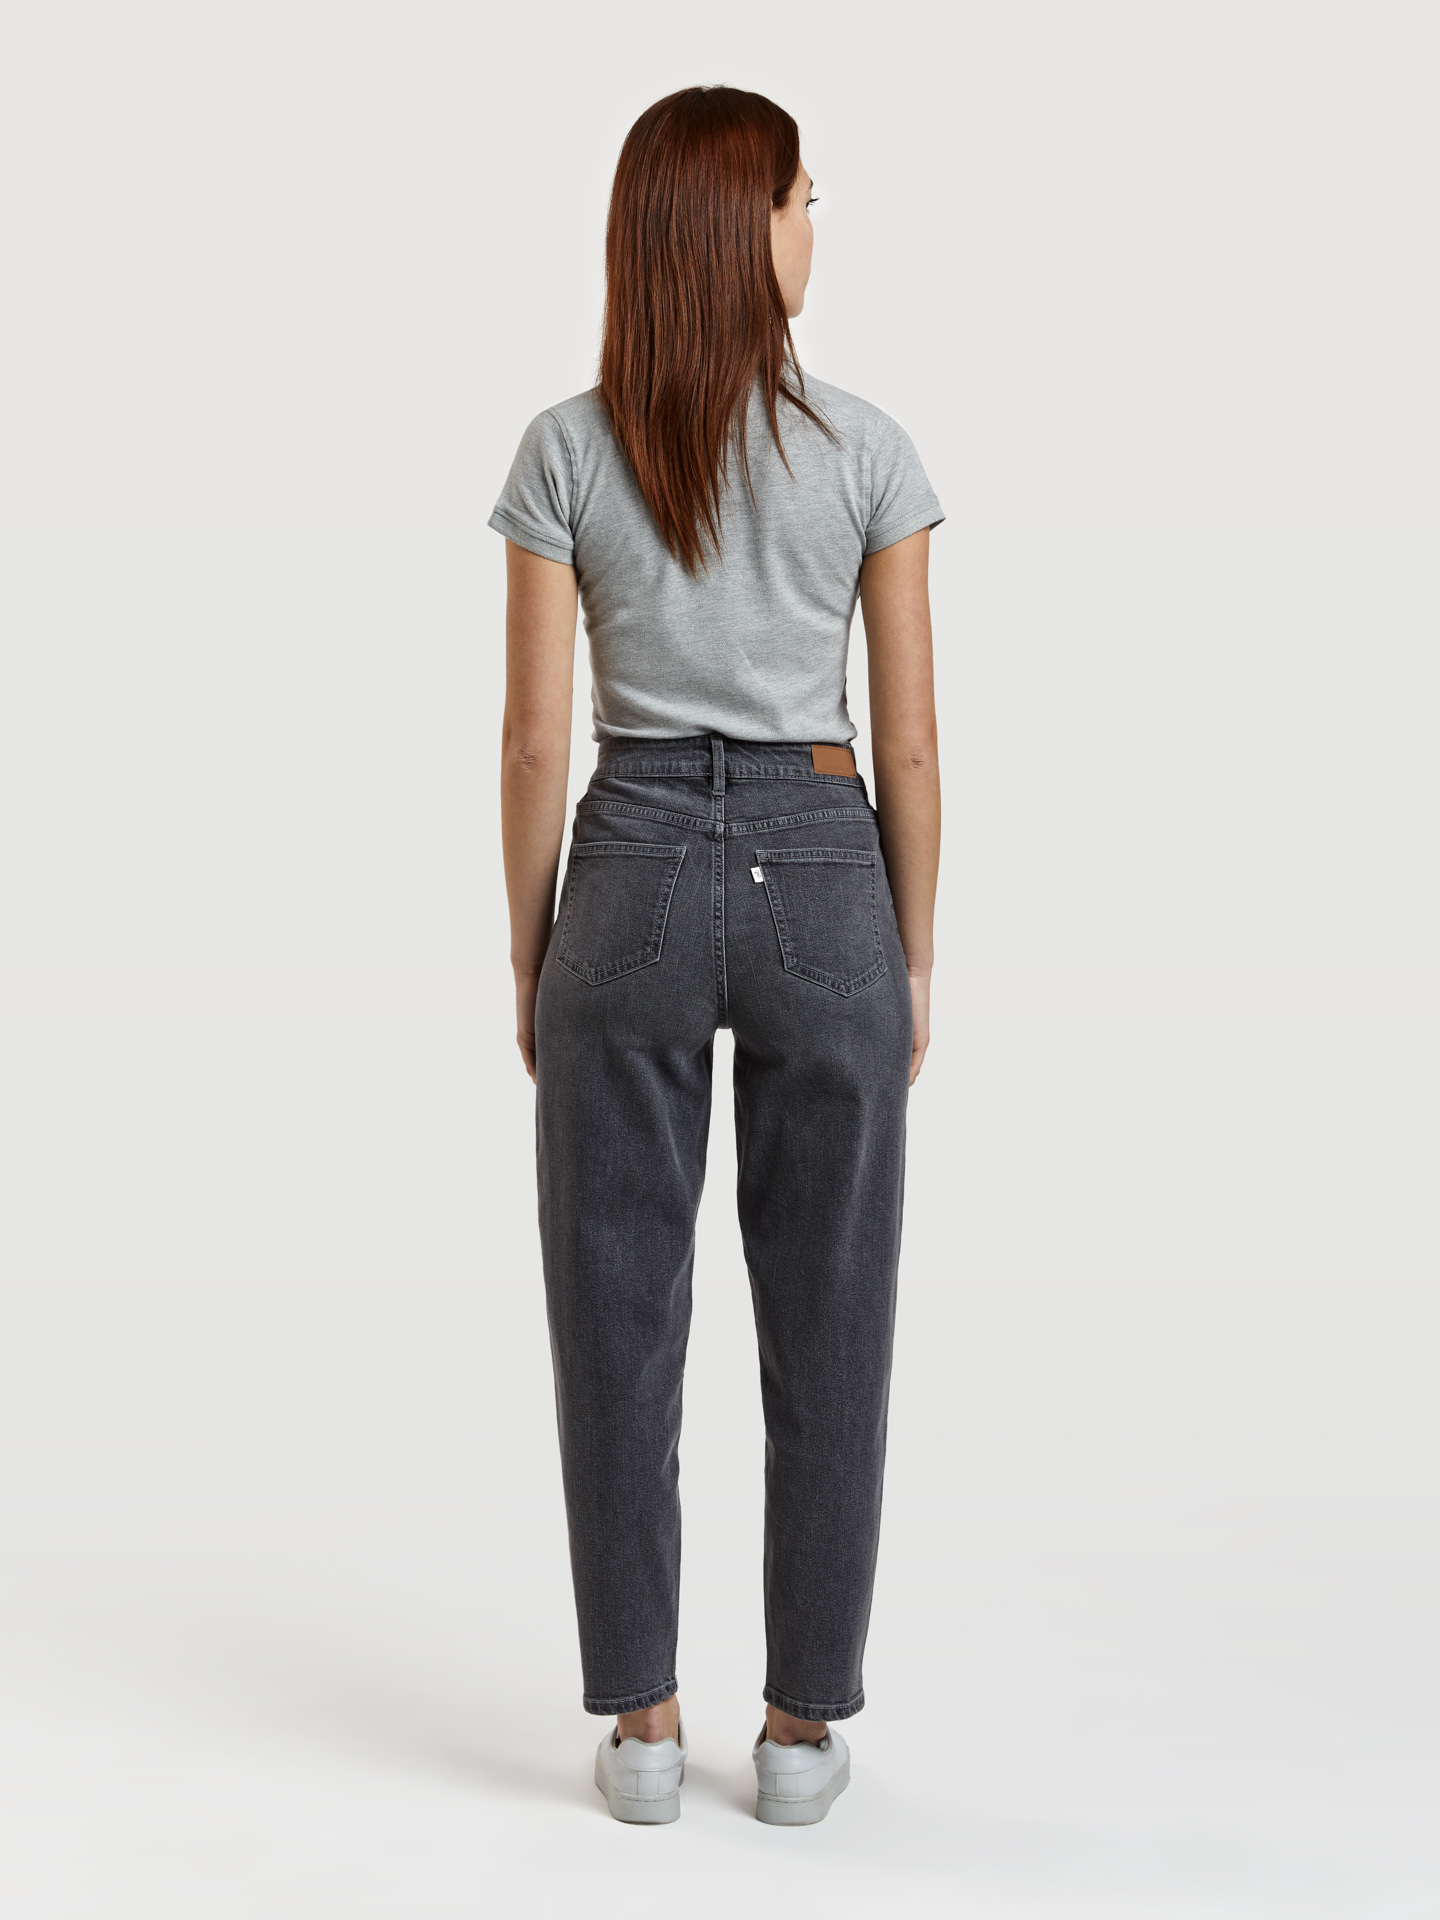 Jeans Grey Casual Woman